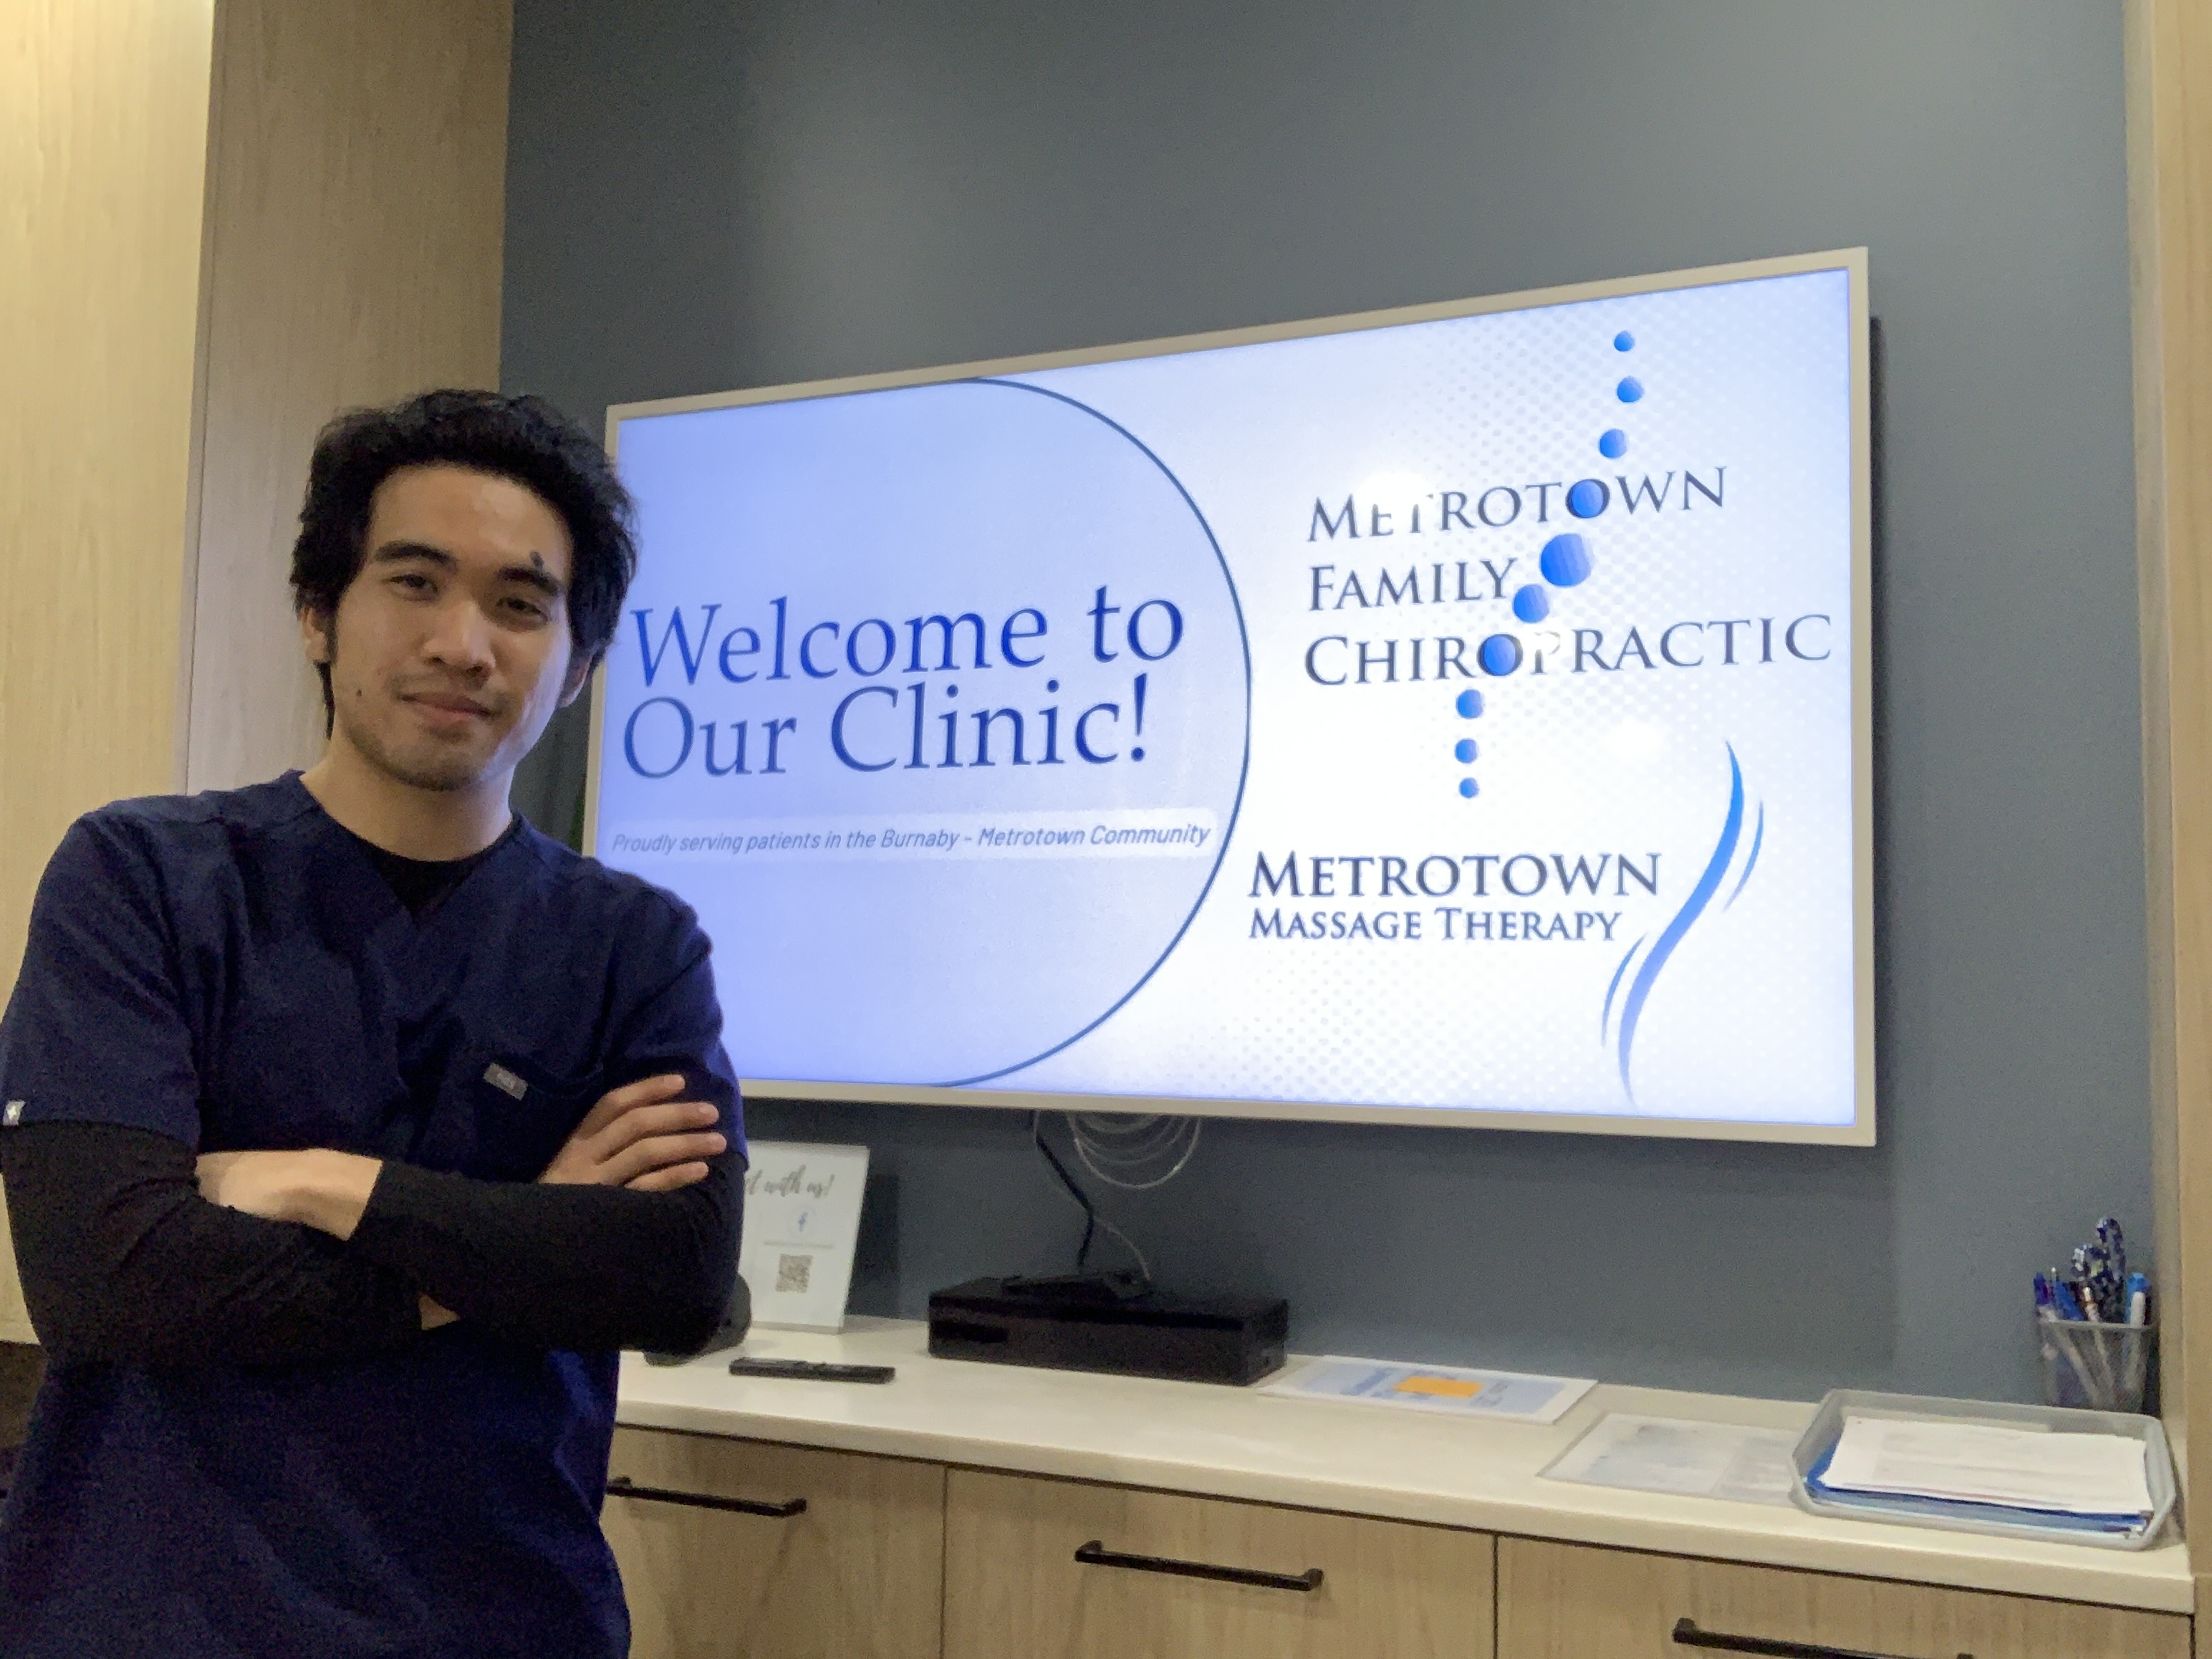 Client Services Assistant Ardie Dizon standing in front of the clinic's main screen